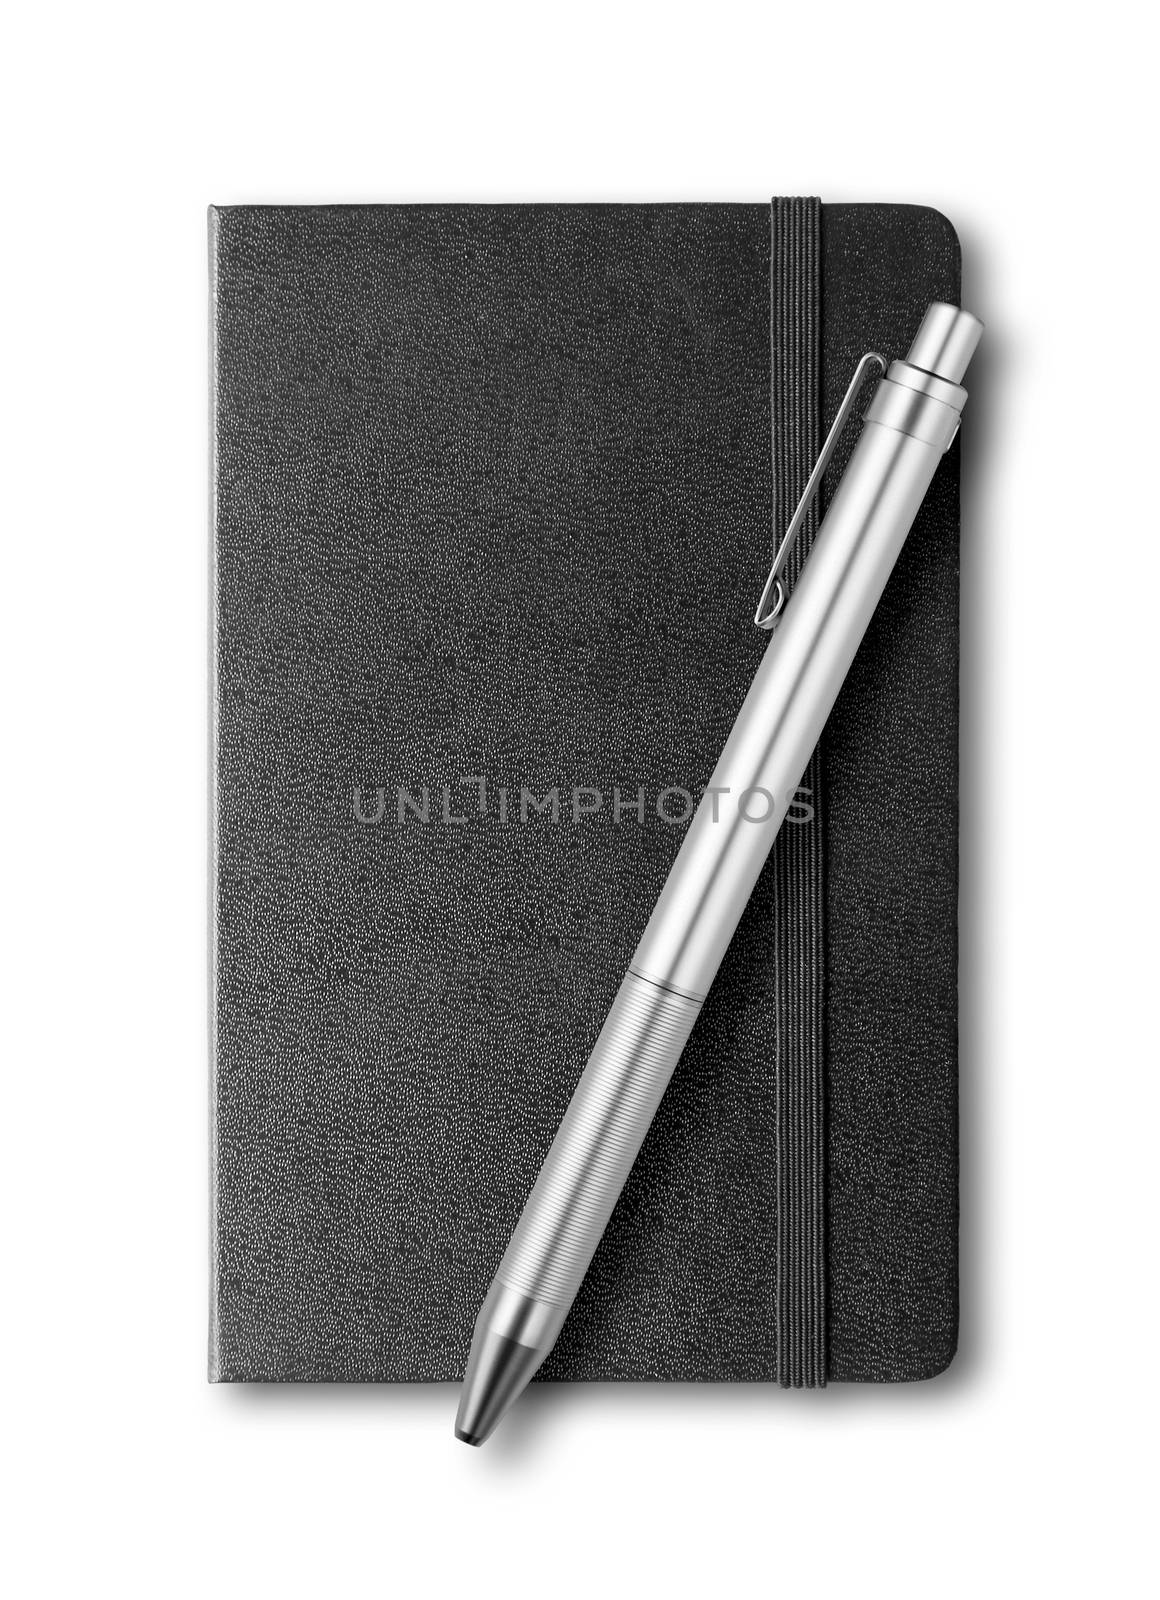 black closed notebook and pen isolated on white by daboost